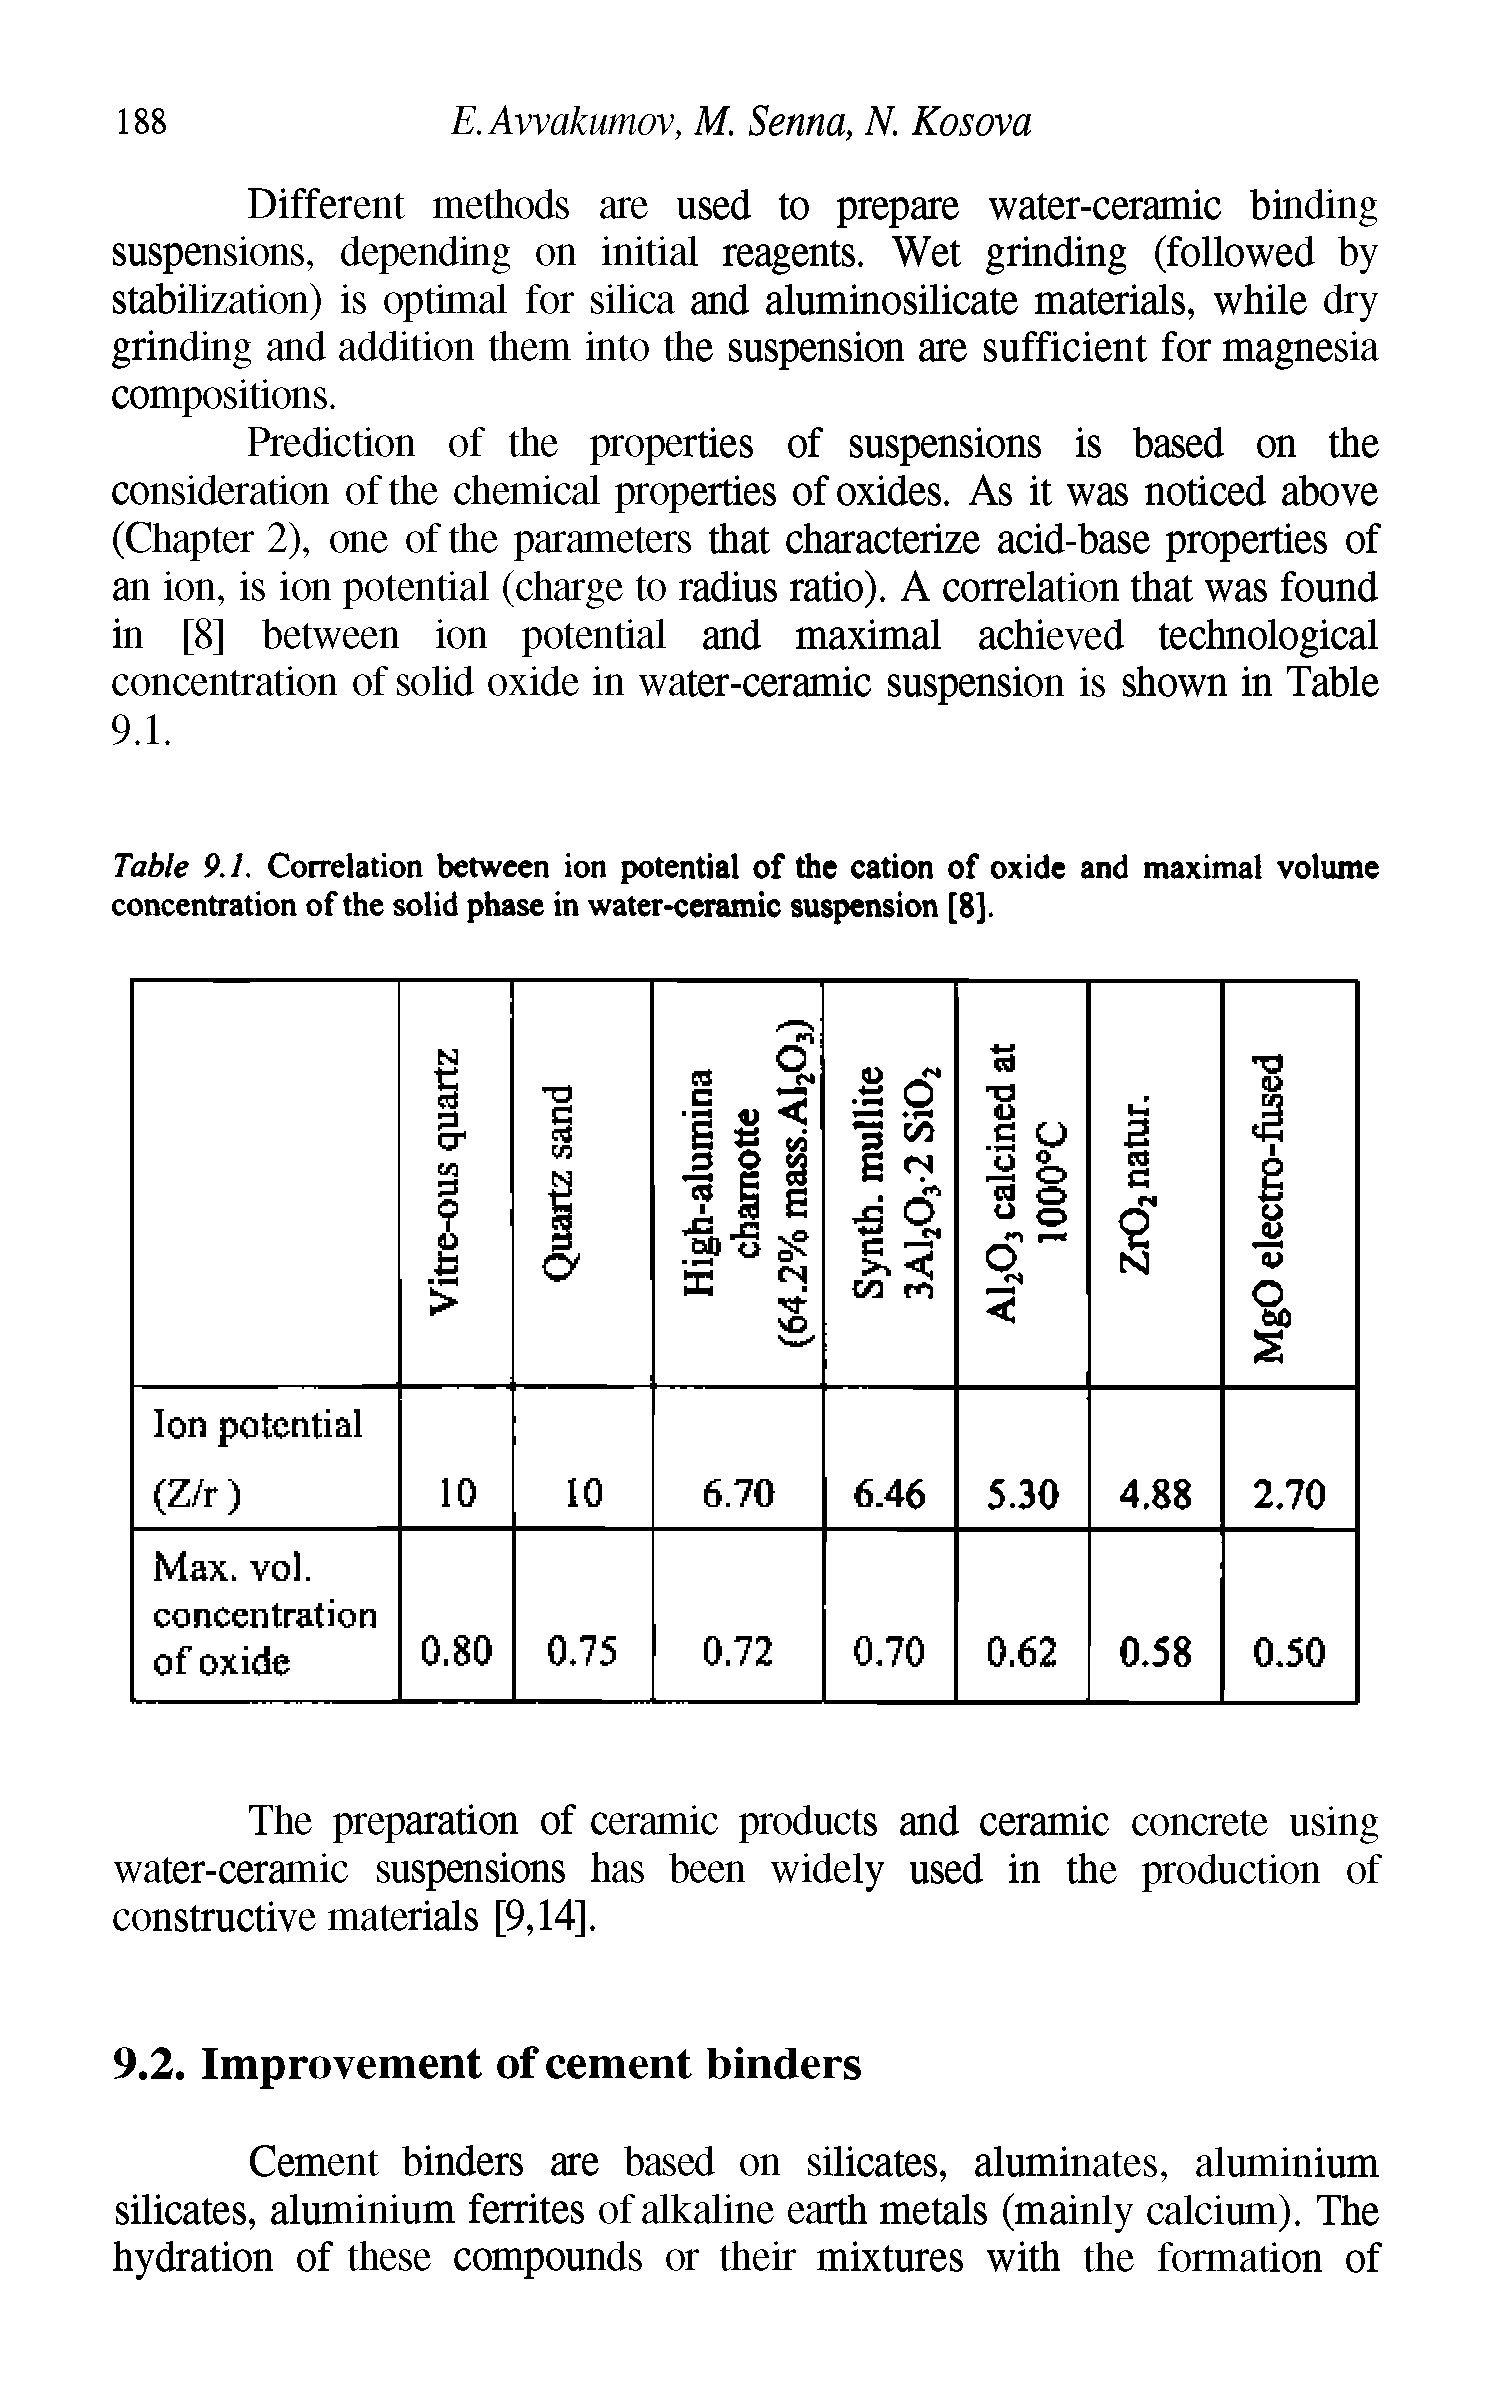 Table 9.1. Correlation between ion potential of the cation of oxide and maximal volume concentration of the solid phase in water-ceramic suspension [8].